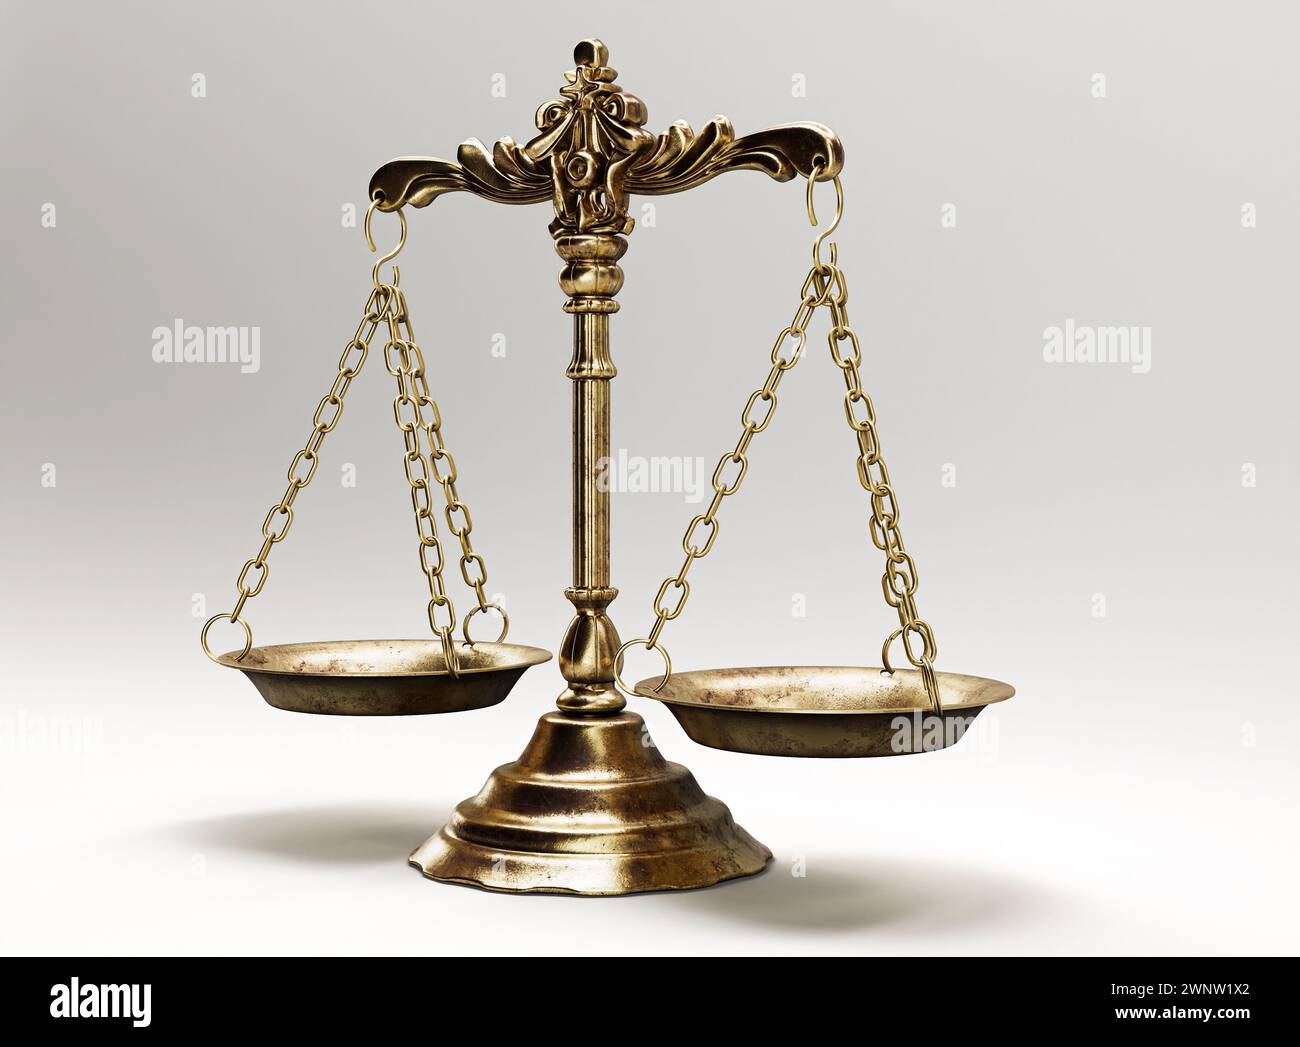 Ornate brass justice scales on a light isolated background - 3D render Stock Photo